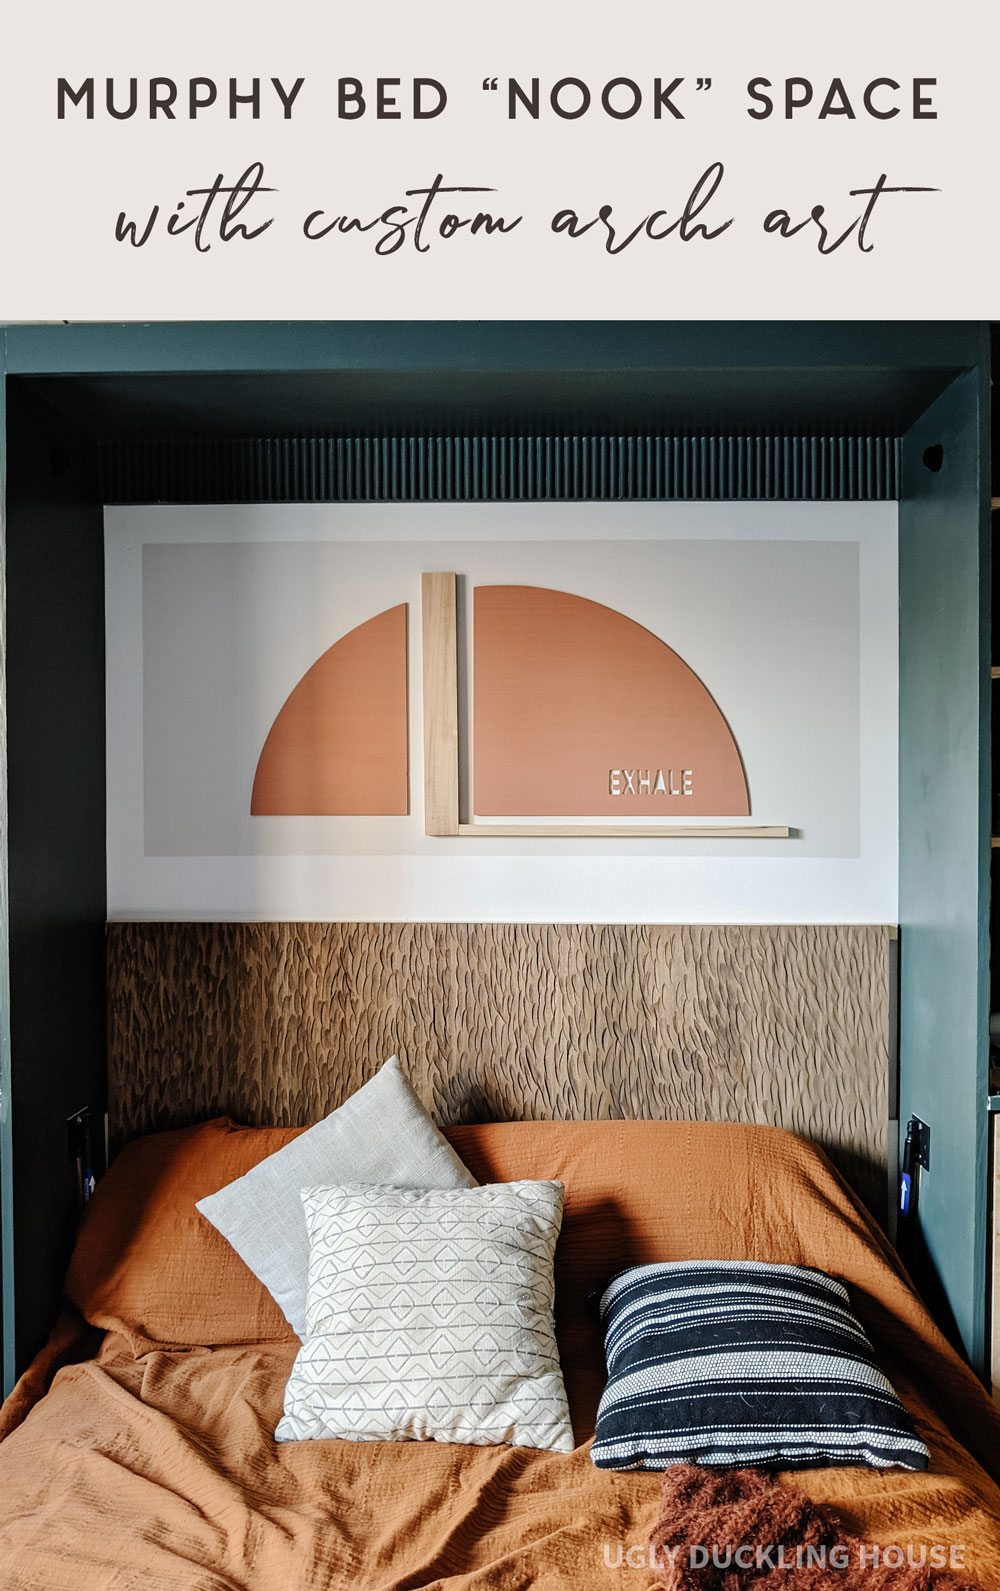 murphy bed nook space with custom arch art